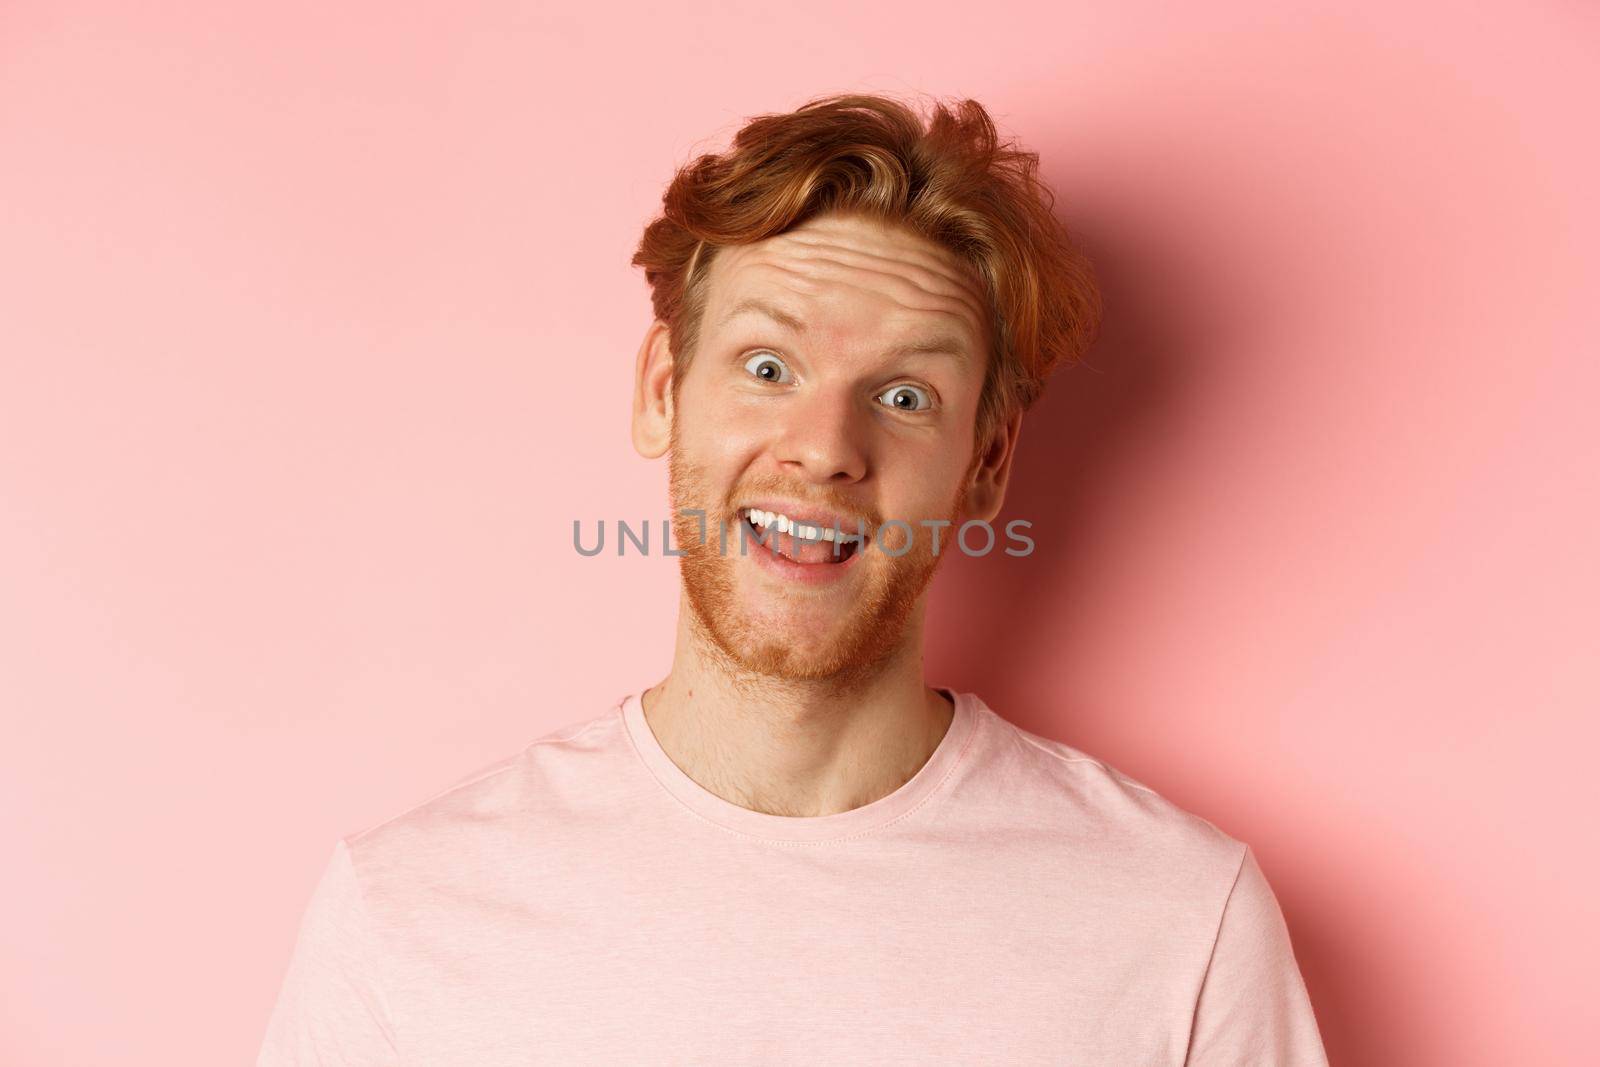 Headshot of funny redhead guy showing tongue, making silly faces at camera, standing joyful against pink background. Copy space